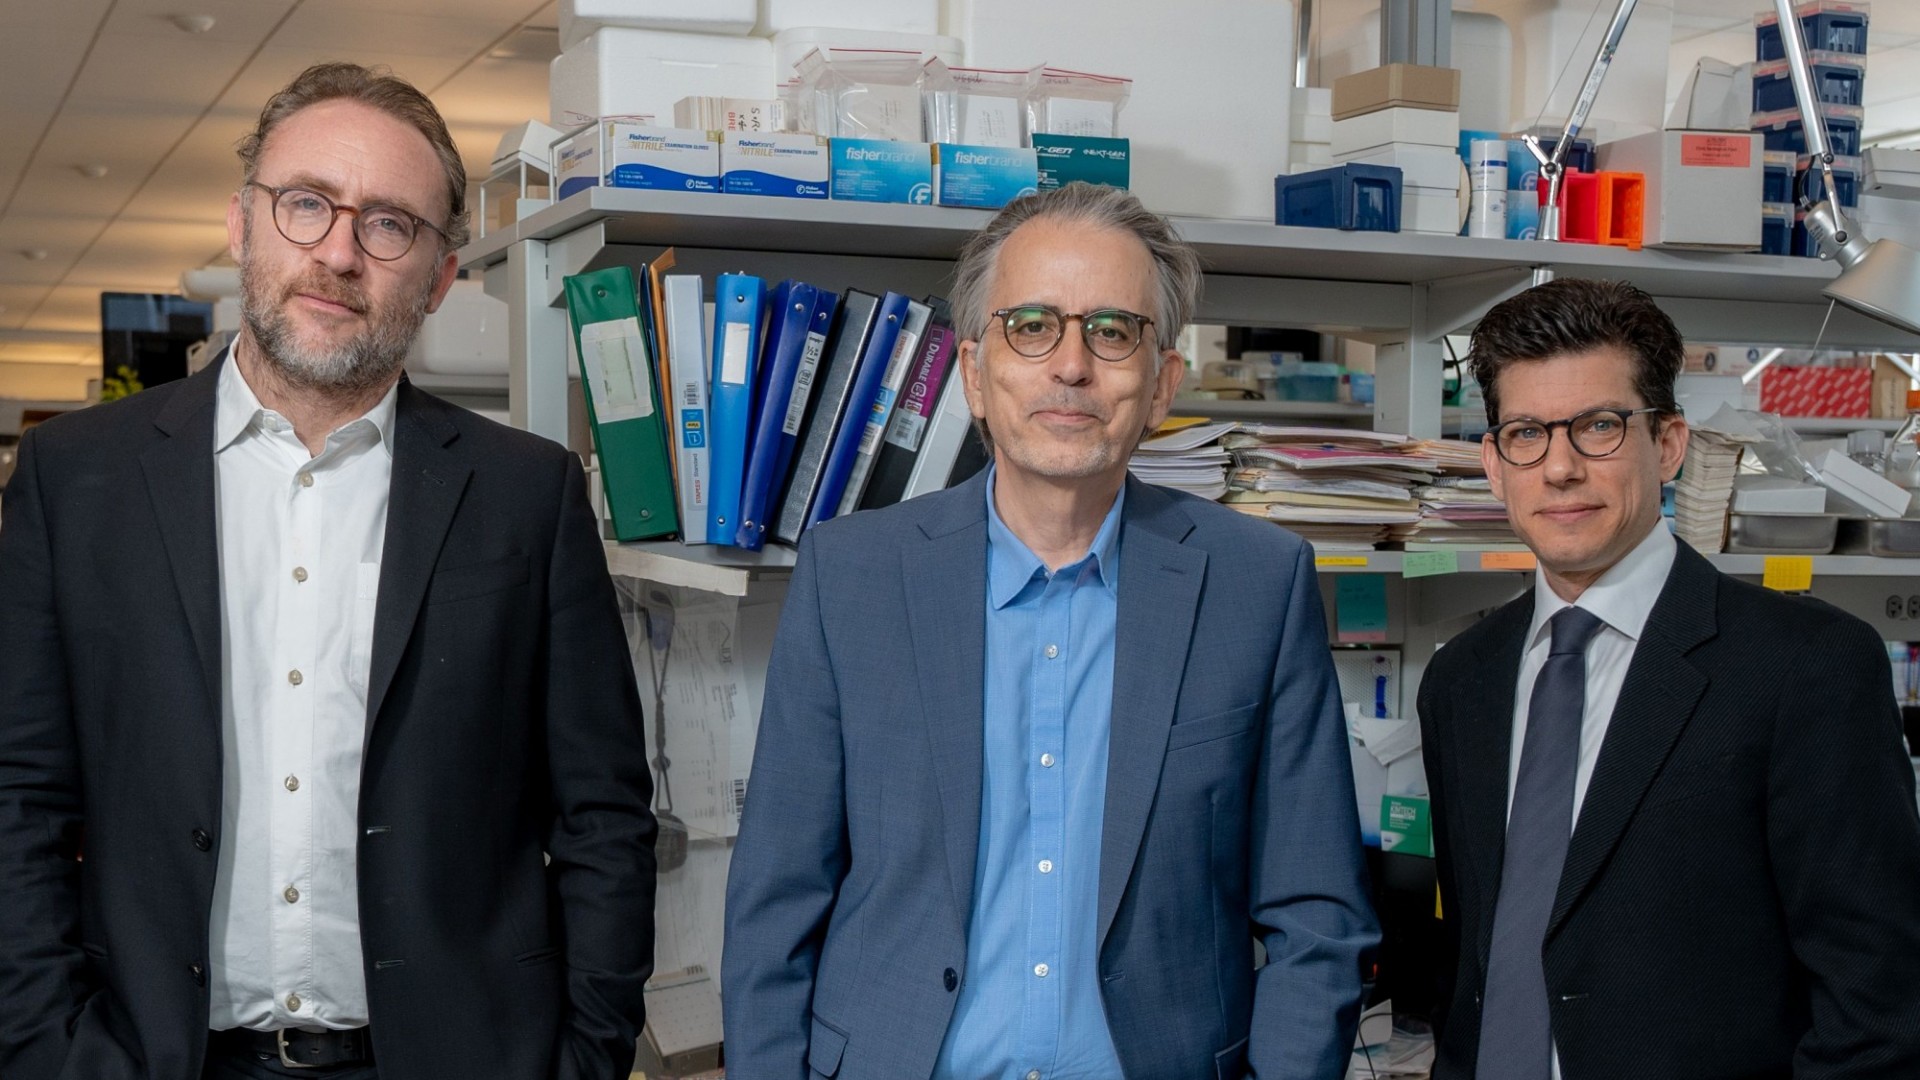 Co-directors of the SNF Center for Precision Psychiatry and Mental Health: from left to right, Sander Markx, Joseph Gogos and Steven Kushner.